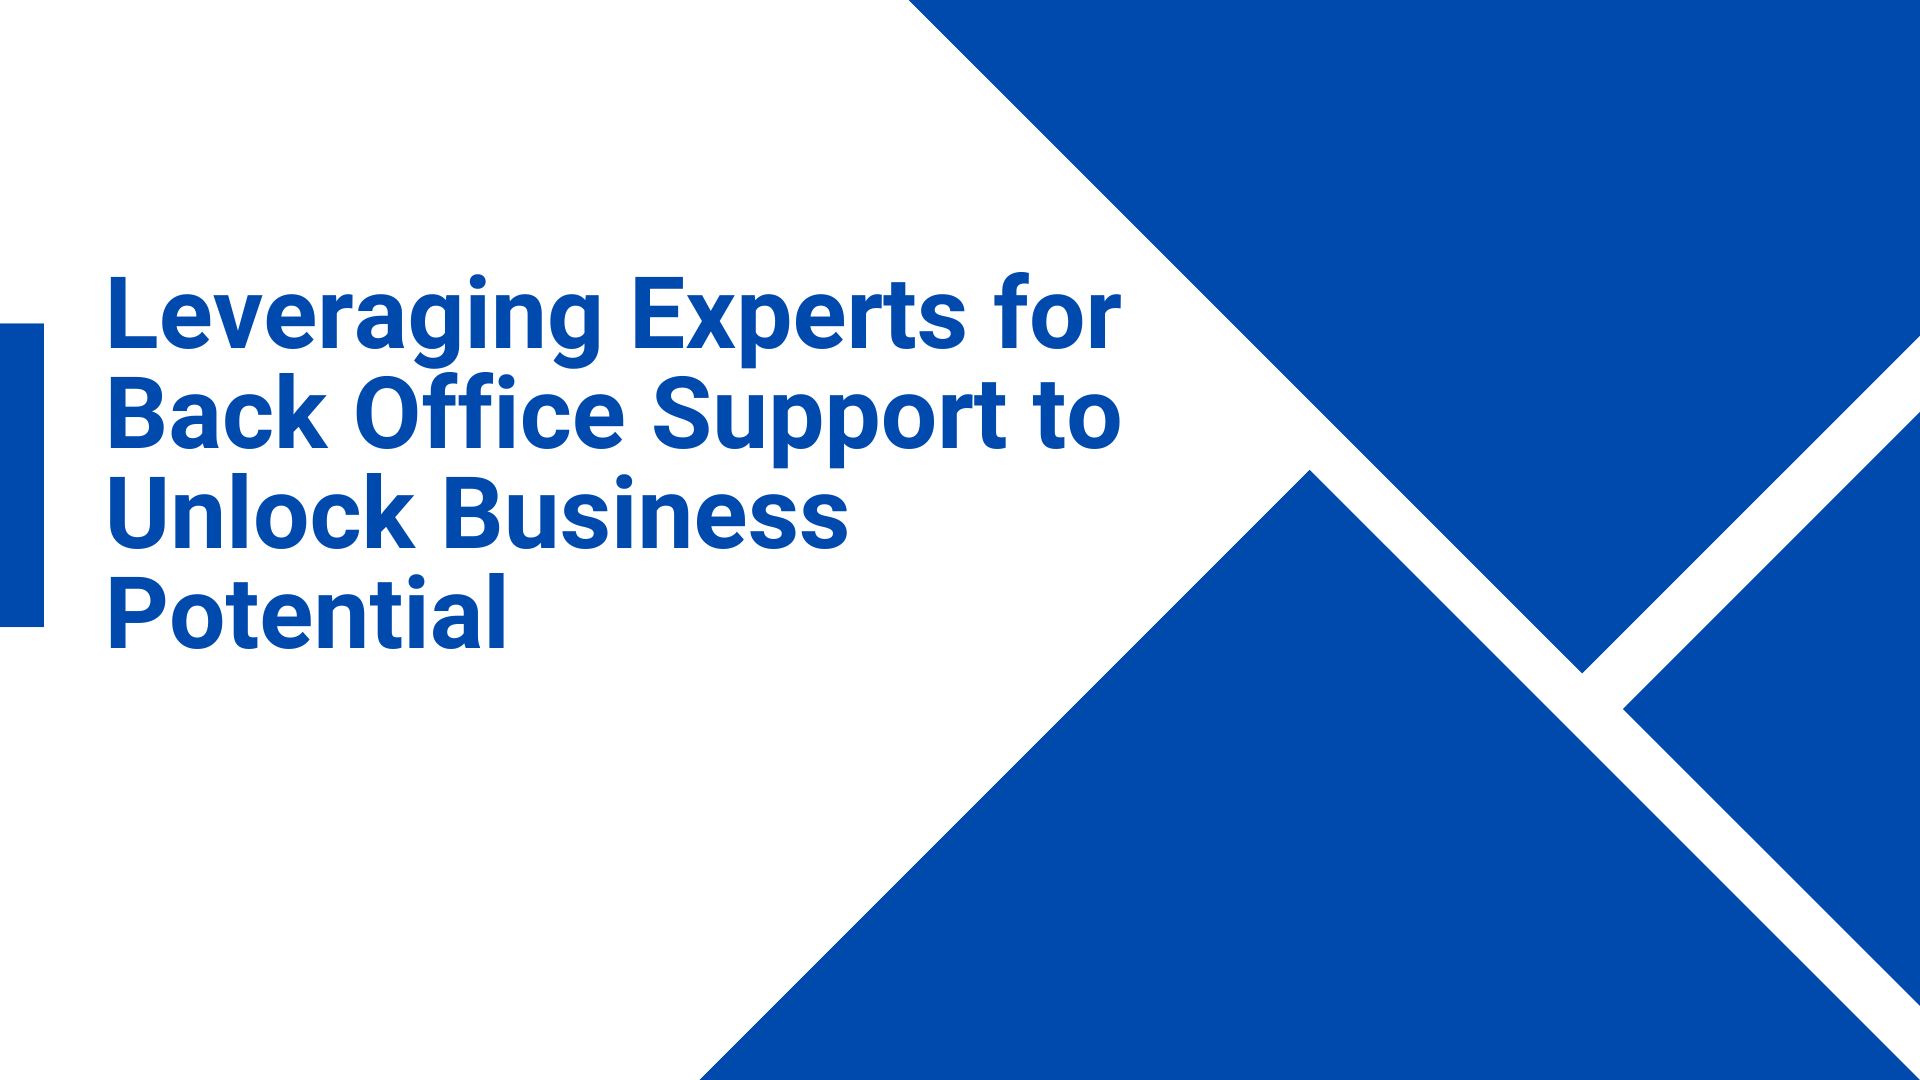 Experts for Back Office Support to Unlock Business Potential